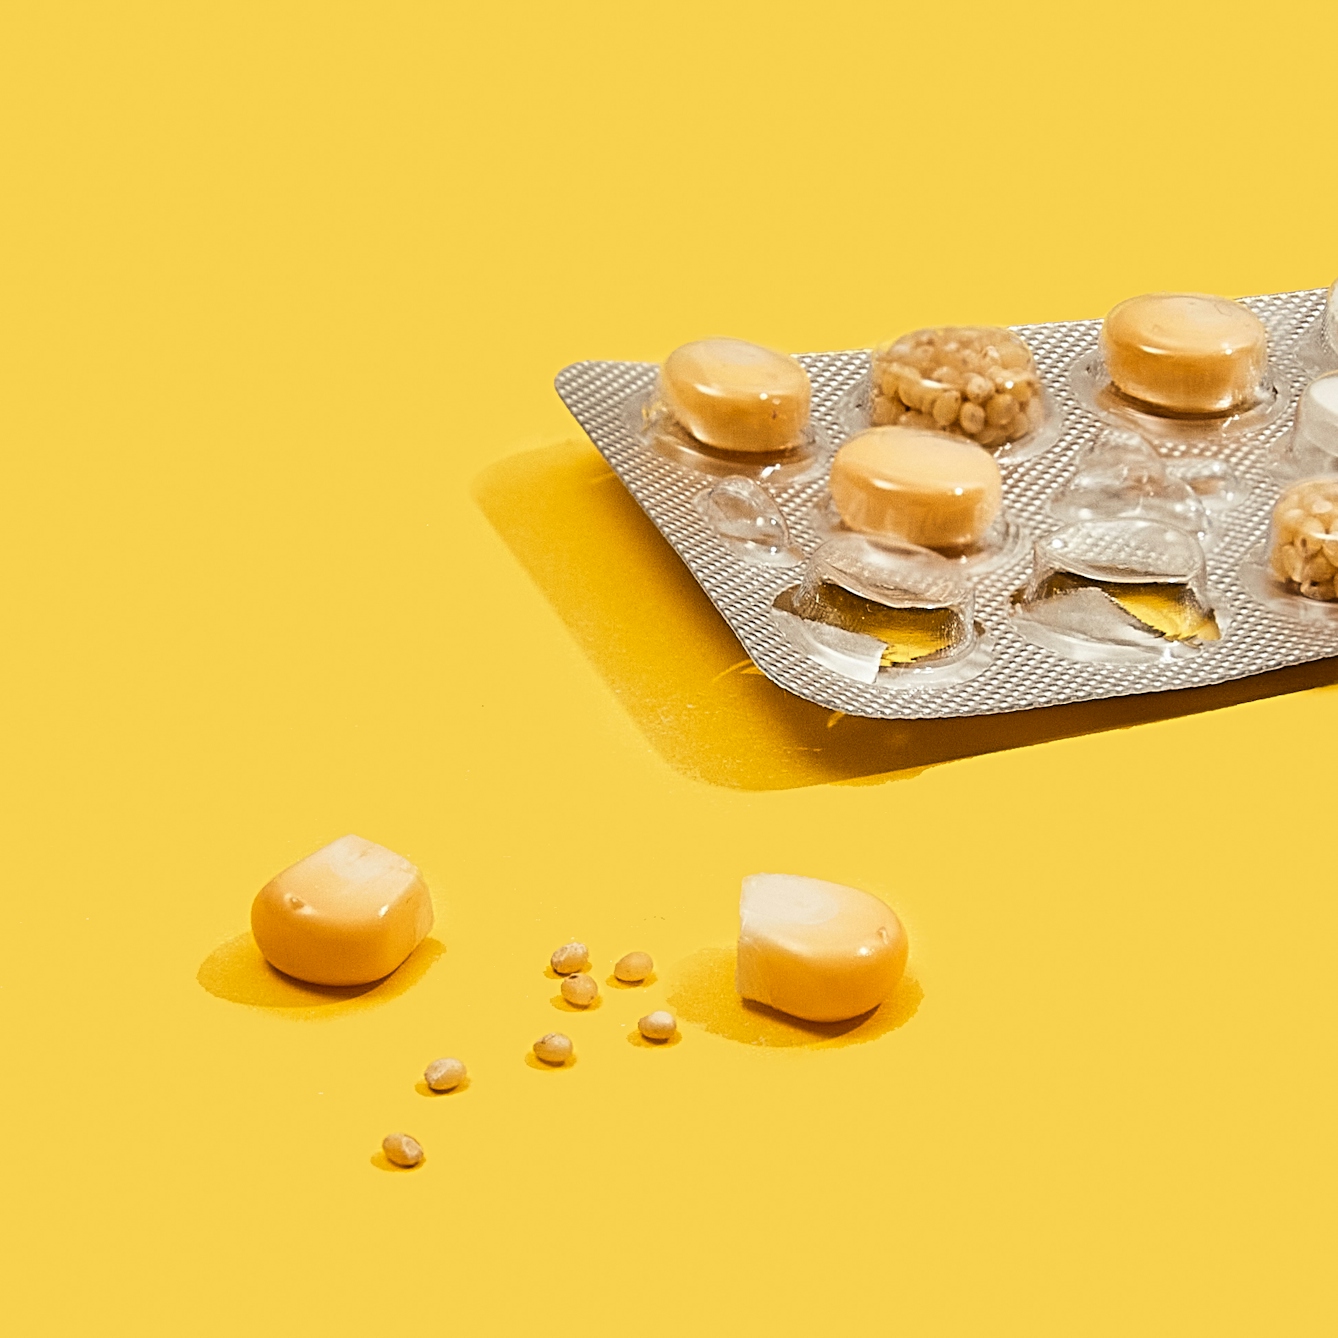 Photograph of a foil medicine pill blister pack sitting on a bright yellow background. The blisters of the pack contain either a single kernel of corn or a collection of small grains of maize. A couple of the blisters are empty and there are 2 kernels of corn and a scattering of maize grains spread out on the yellow background.